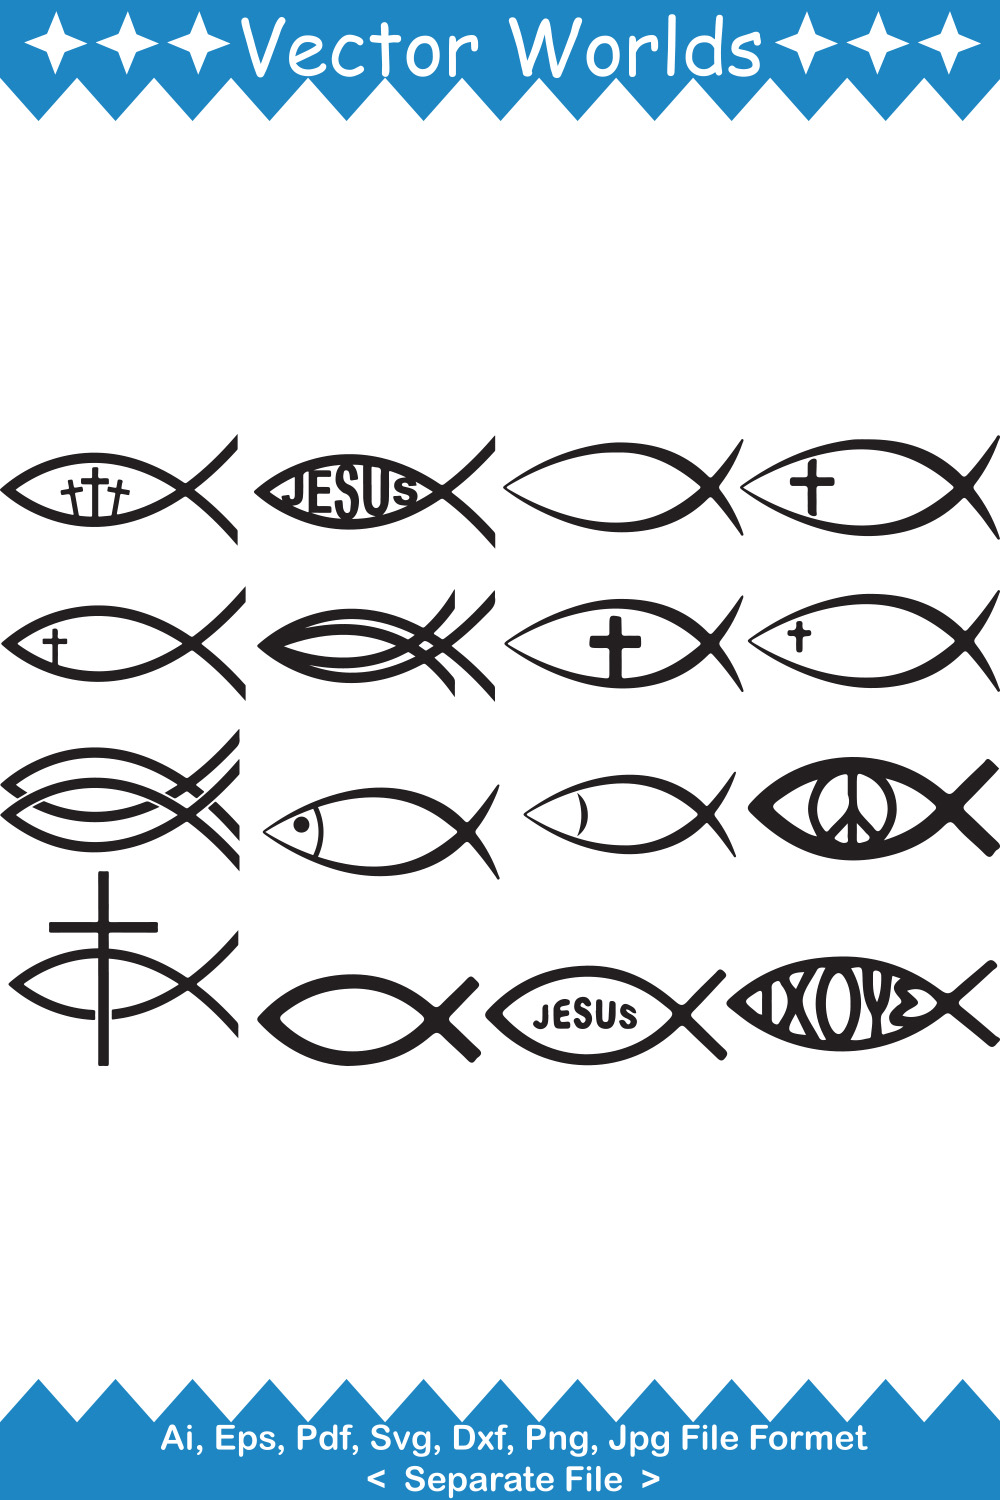 Collection of amazing vector image of Christian fish.